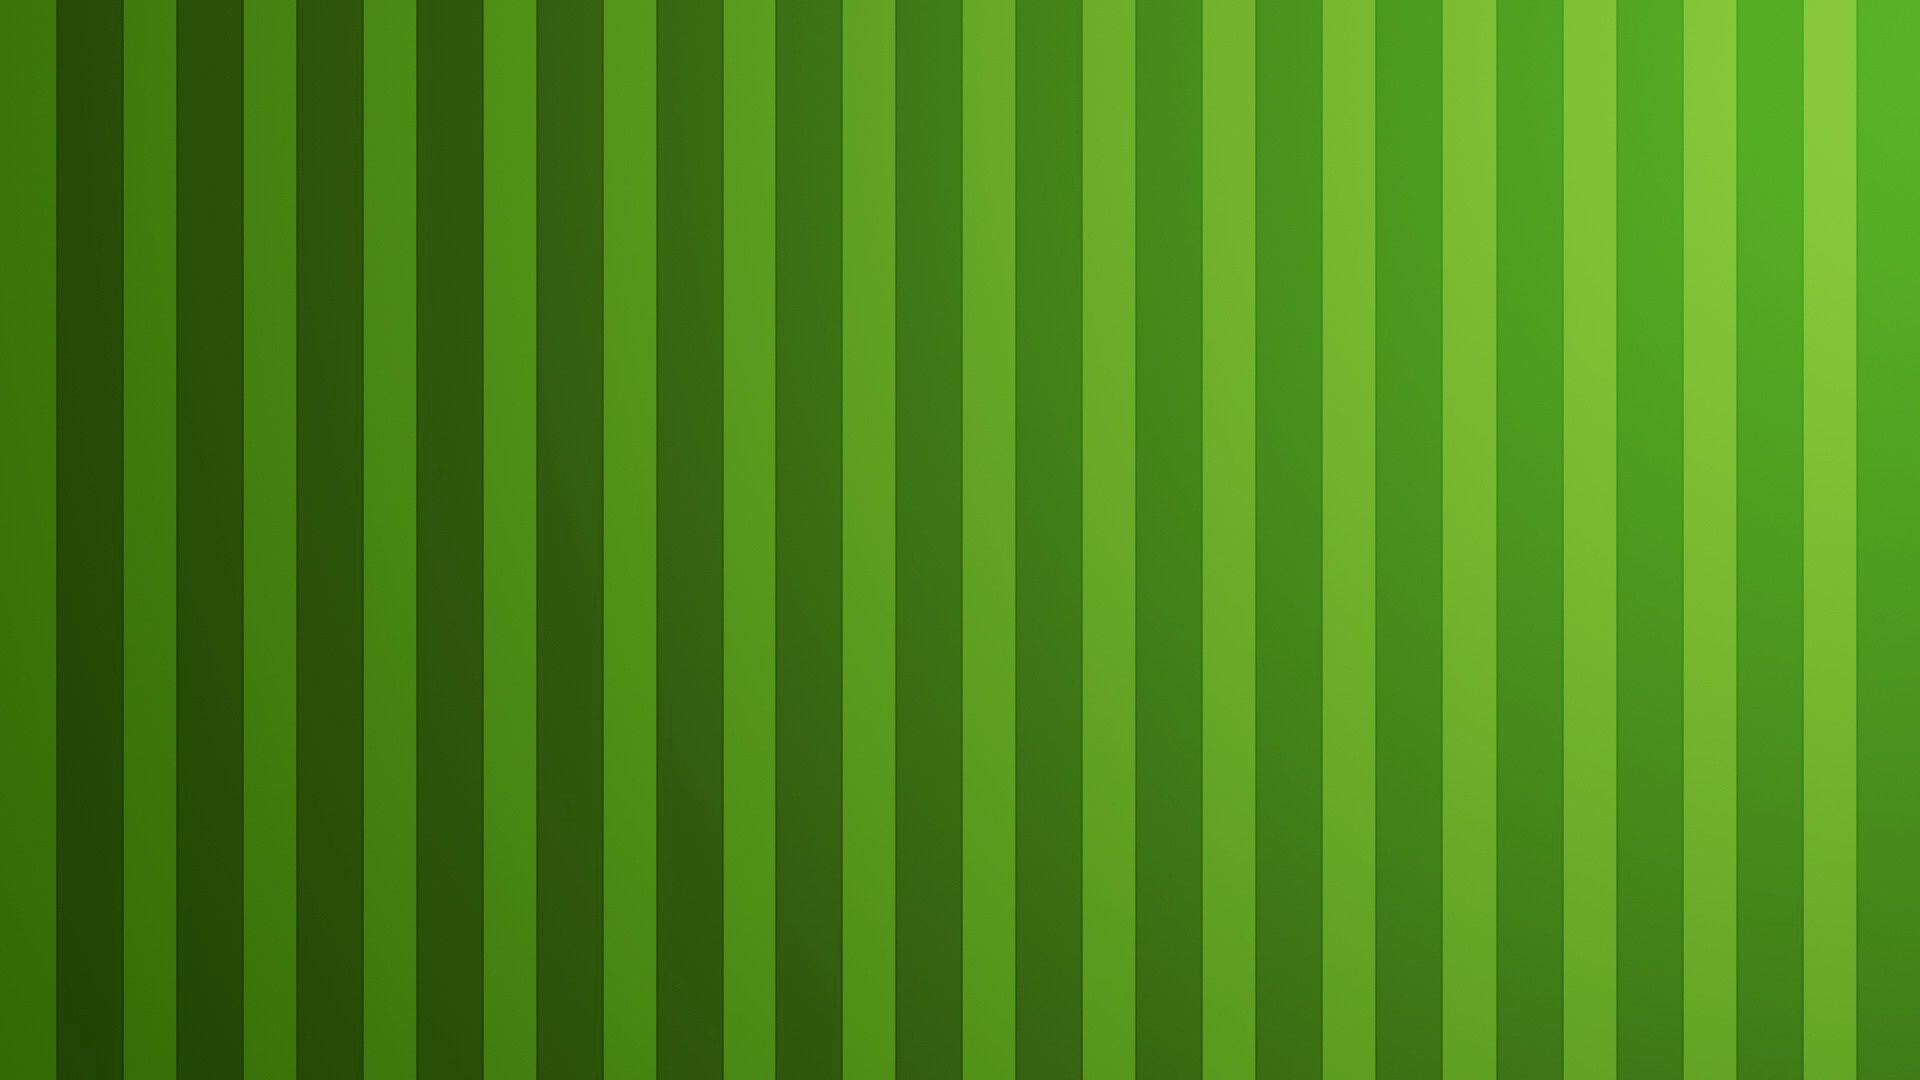 73612 download wallpaper streaks, vertical, stripes, abstract, green, lines screensavers and pictures for free